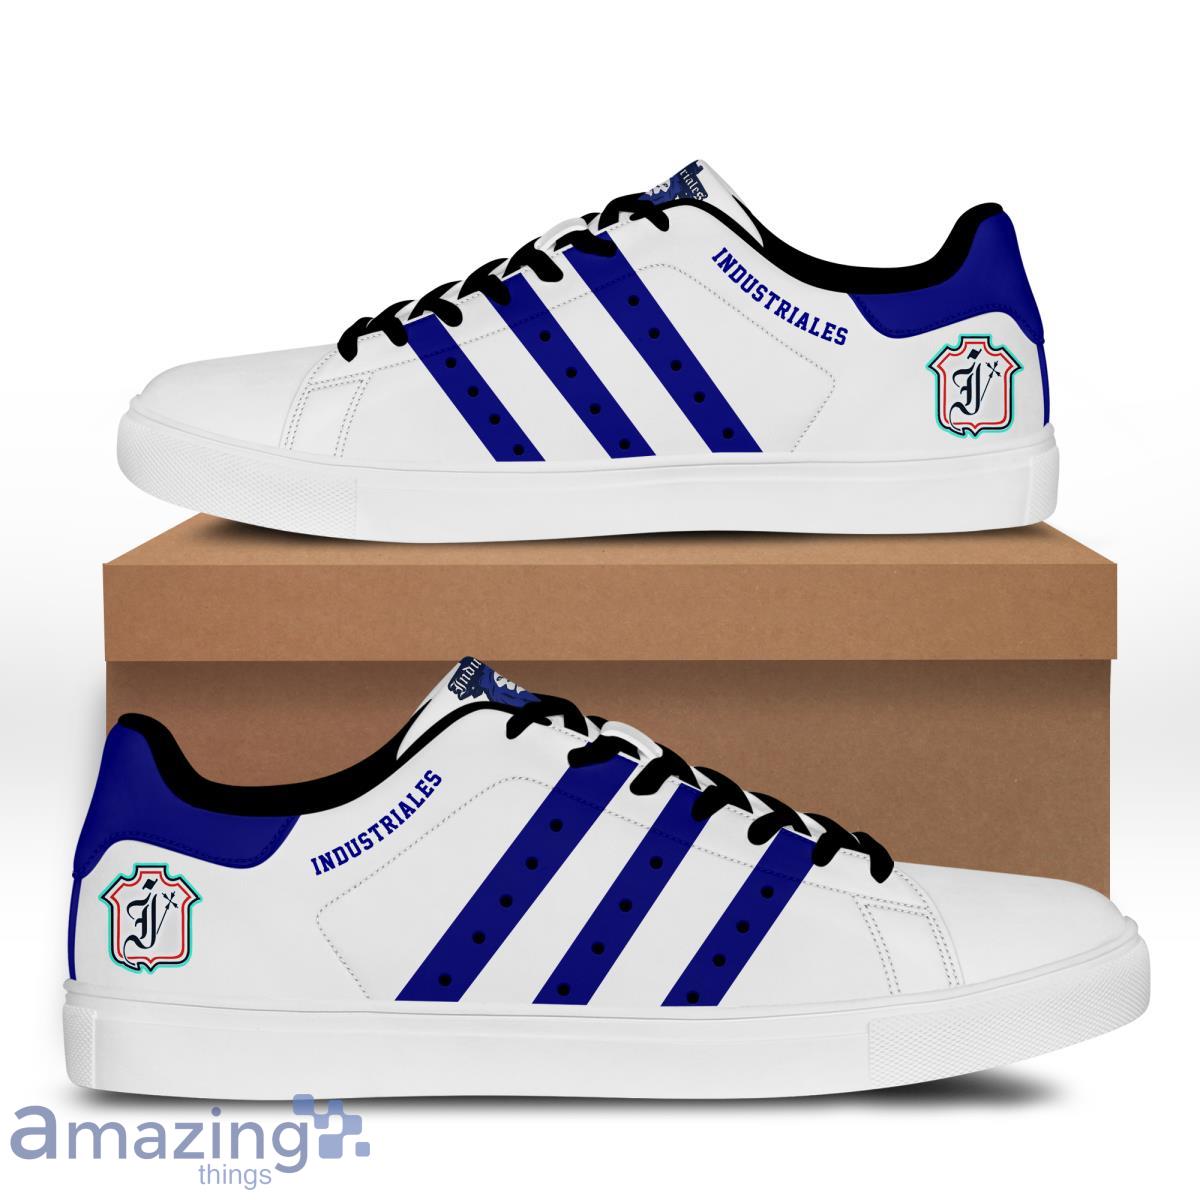 Serie Nacional Industriales Skate Shoes Product Photo 1